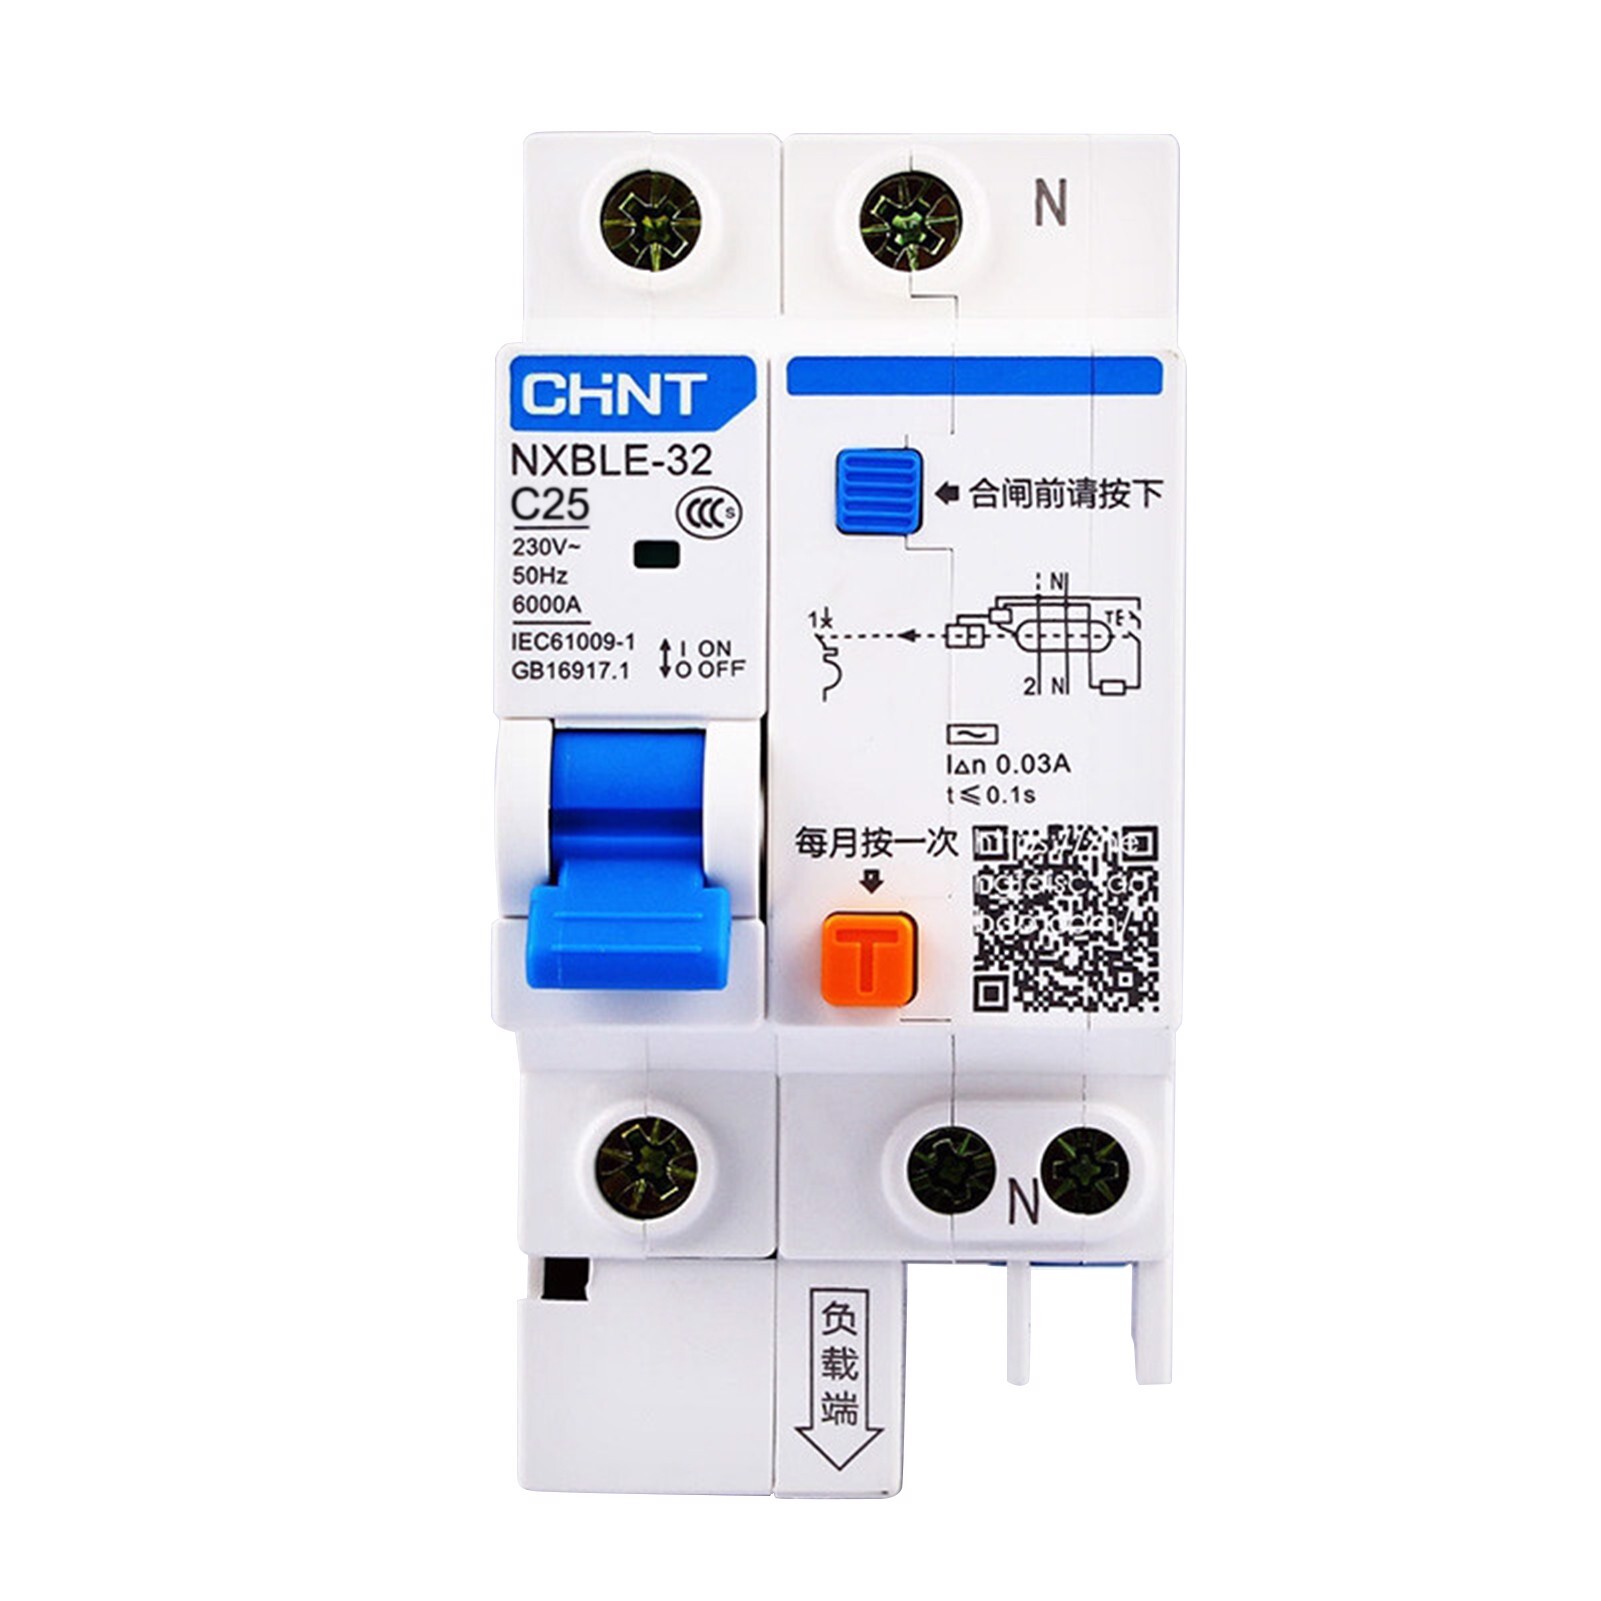 Cầu dao RCBO Chint NXBLE-32 1P+N 16A